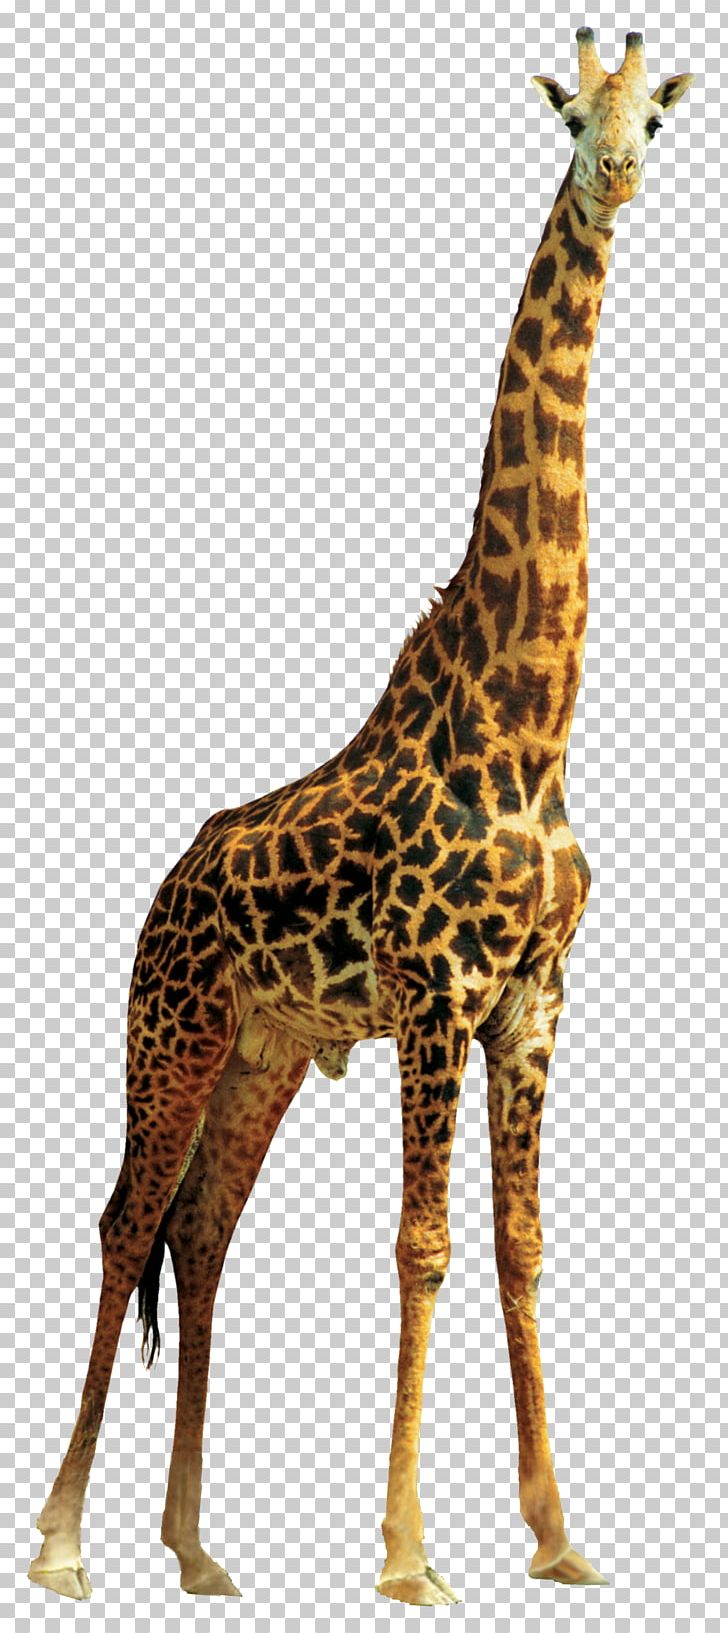 Northern Giraffe Transparency And Translucency Animal PNG, Clipart, Animal, Animal Figure, Animals, Fauna, Giraffe Free PNG Download